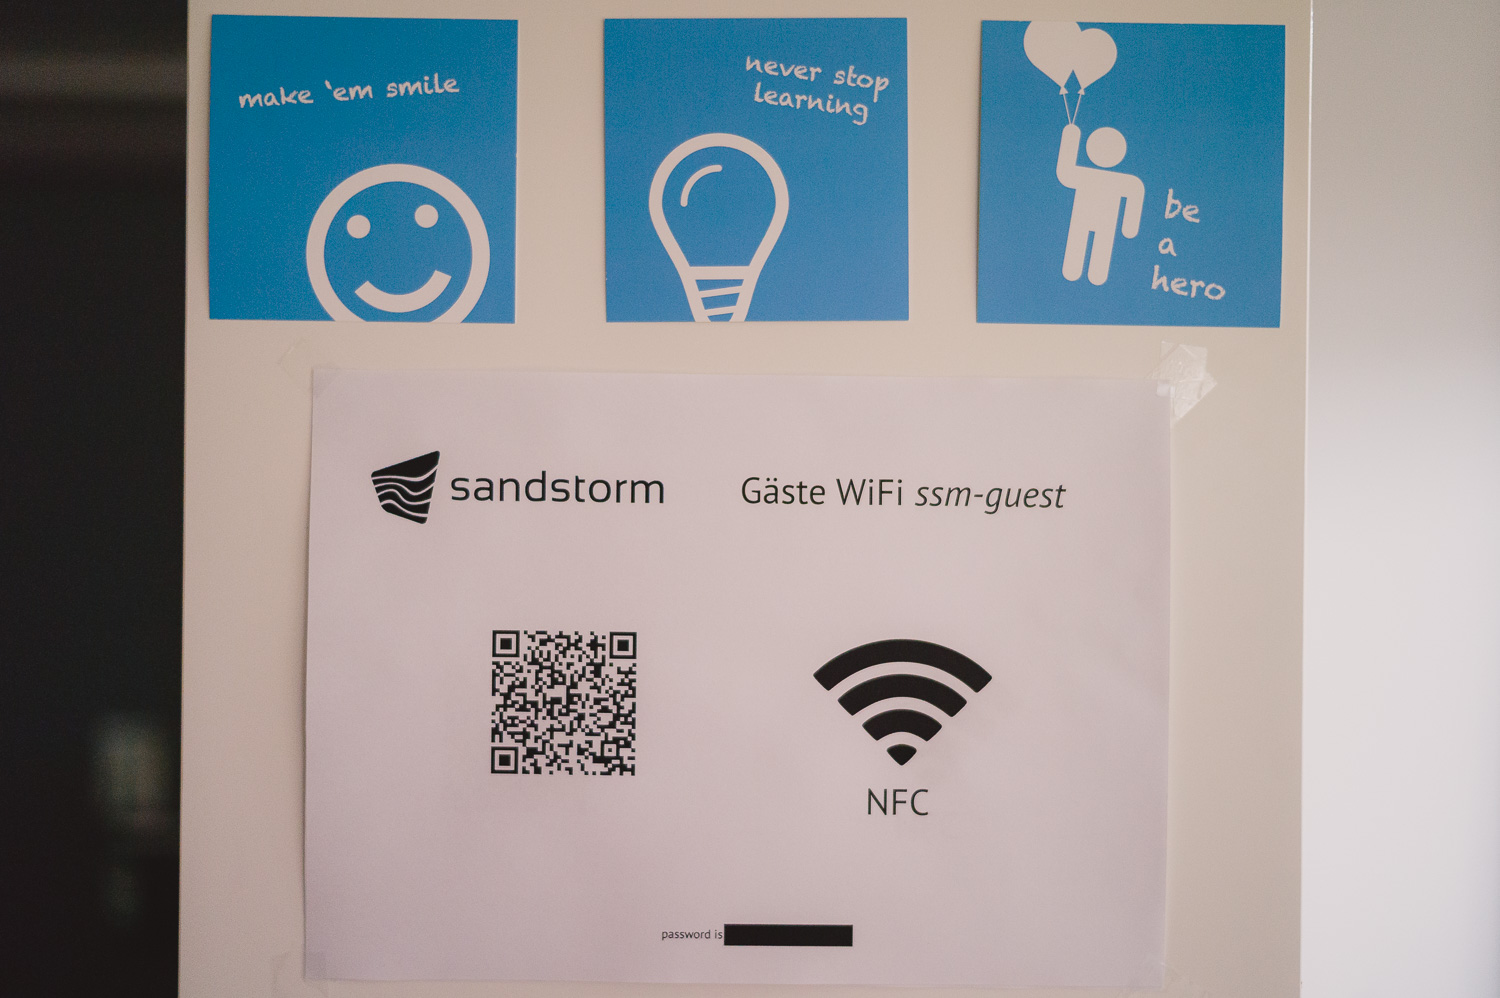 Welcome to our guest WiFi poster in coffee lounge